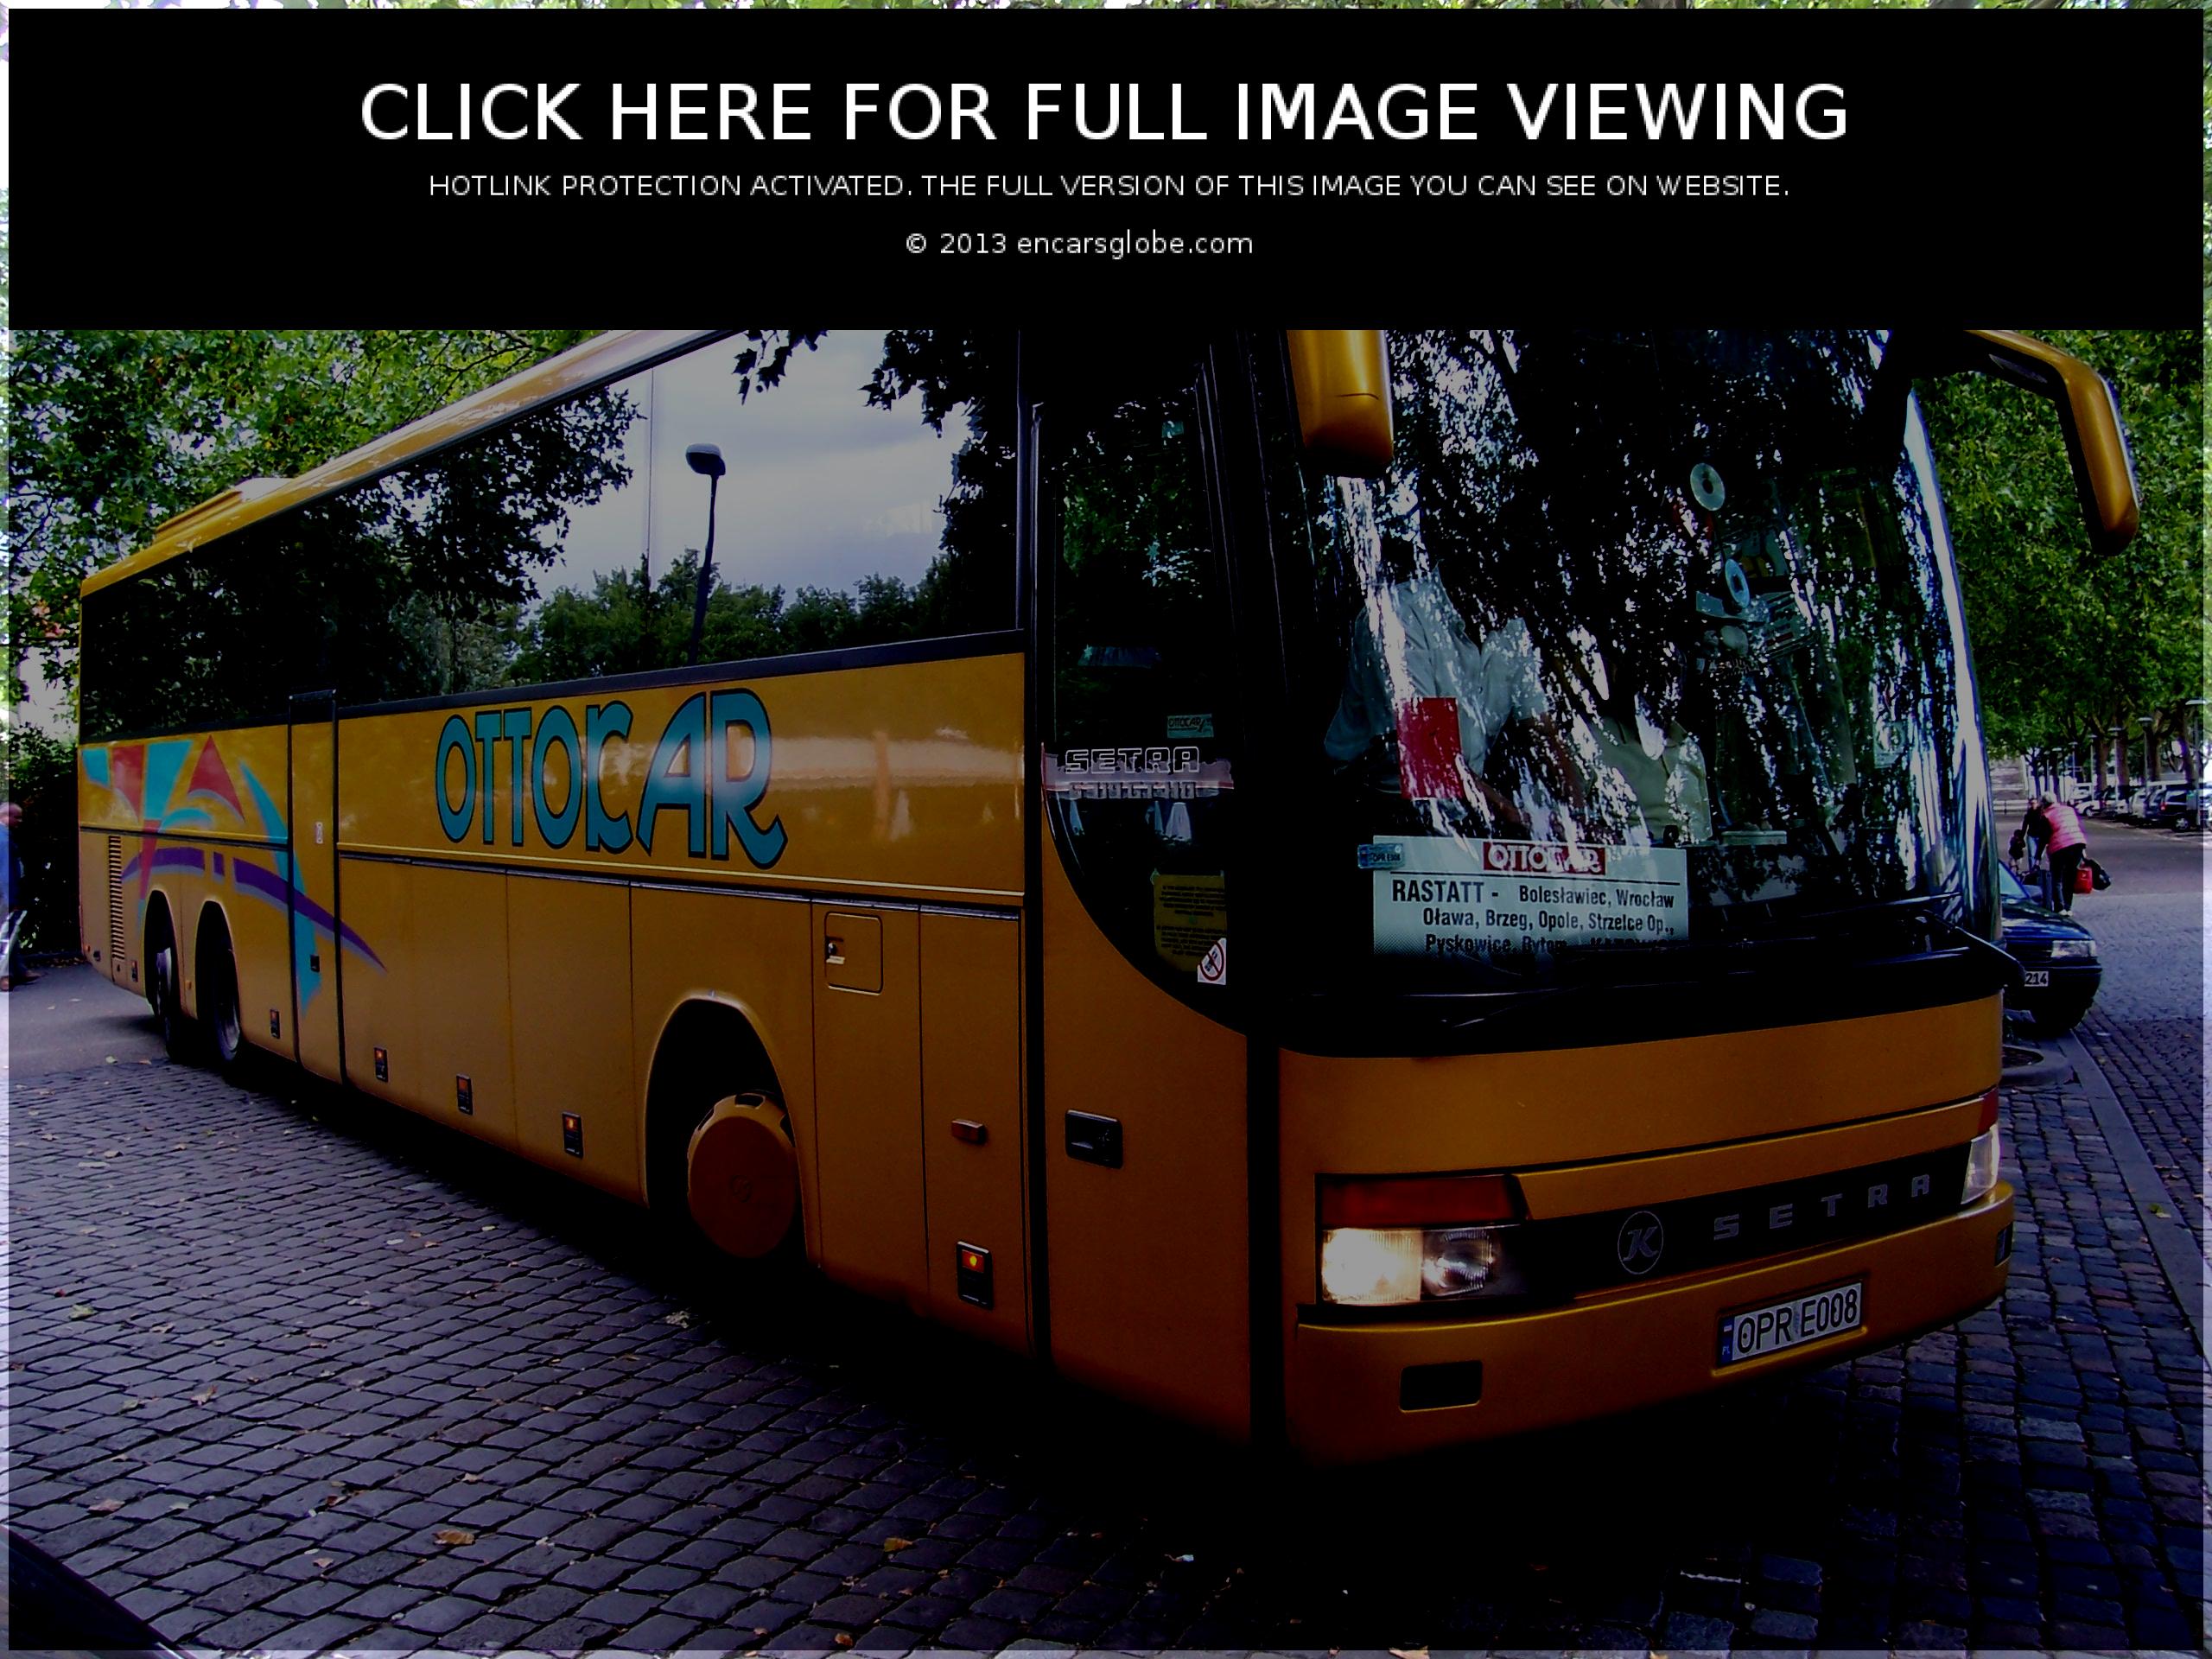 Gallery of all models of Setra: Setra S 215 HDH, Setra S 217 HDH ...